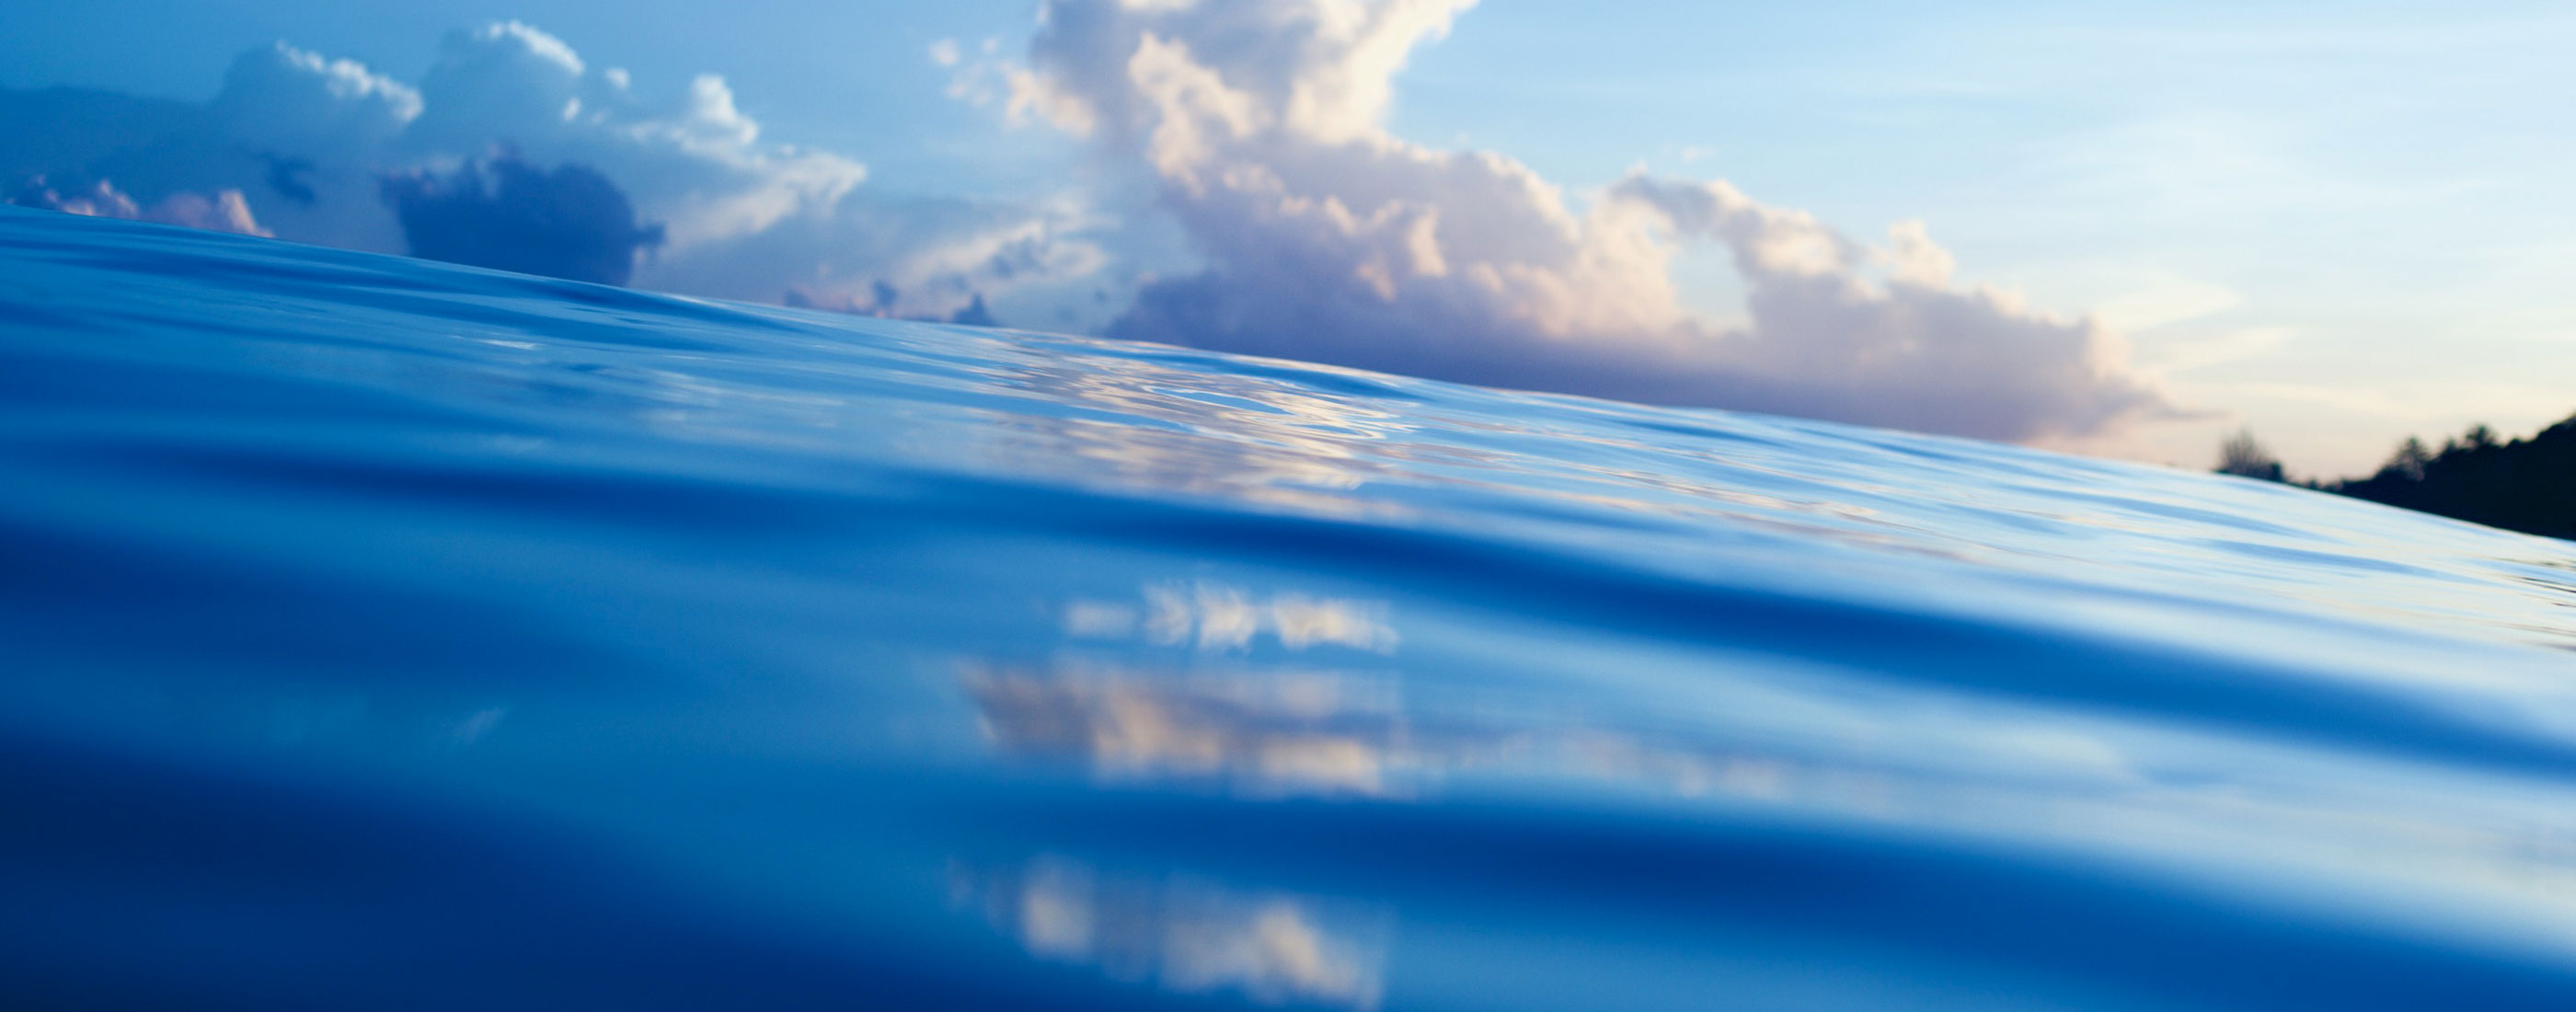 Ocean water surface with clouds in the background on the horizon